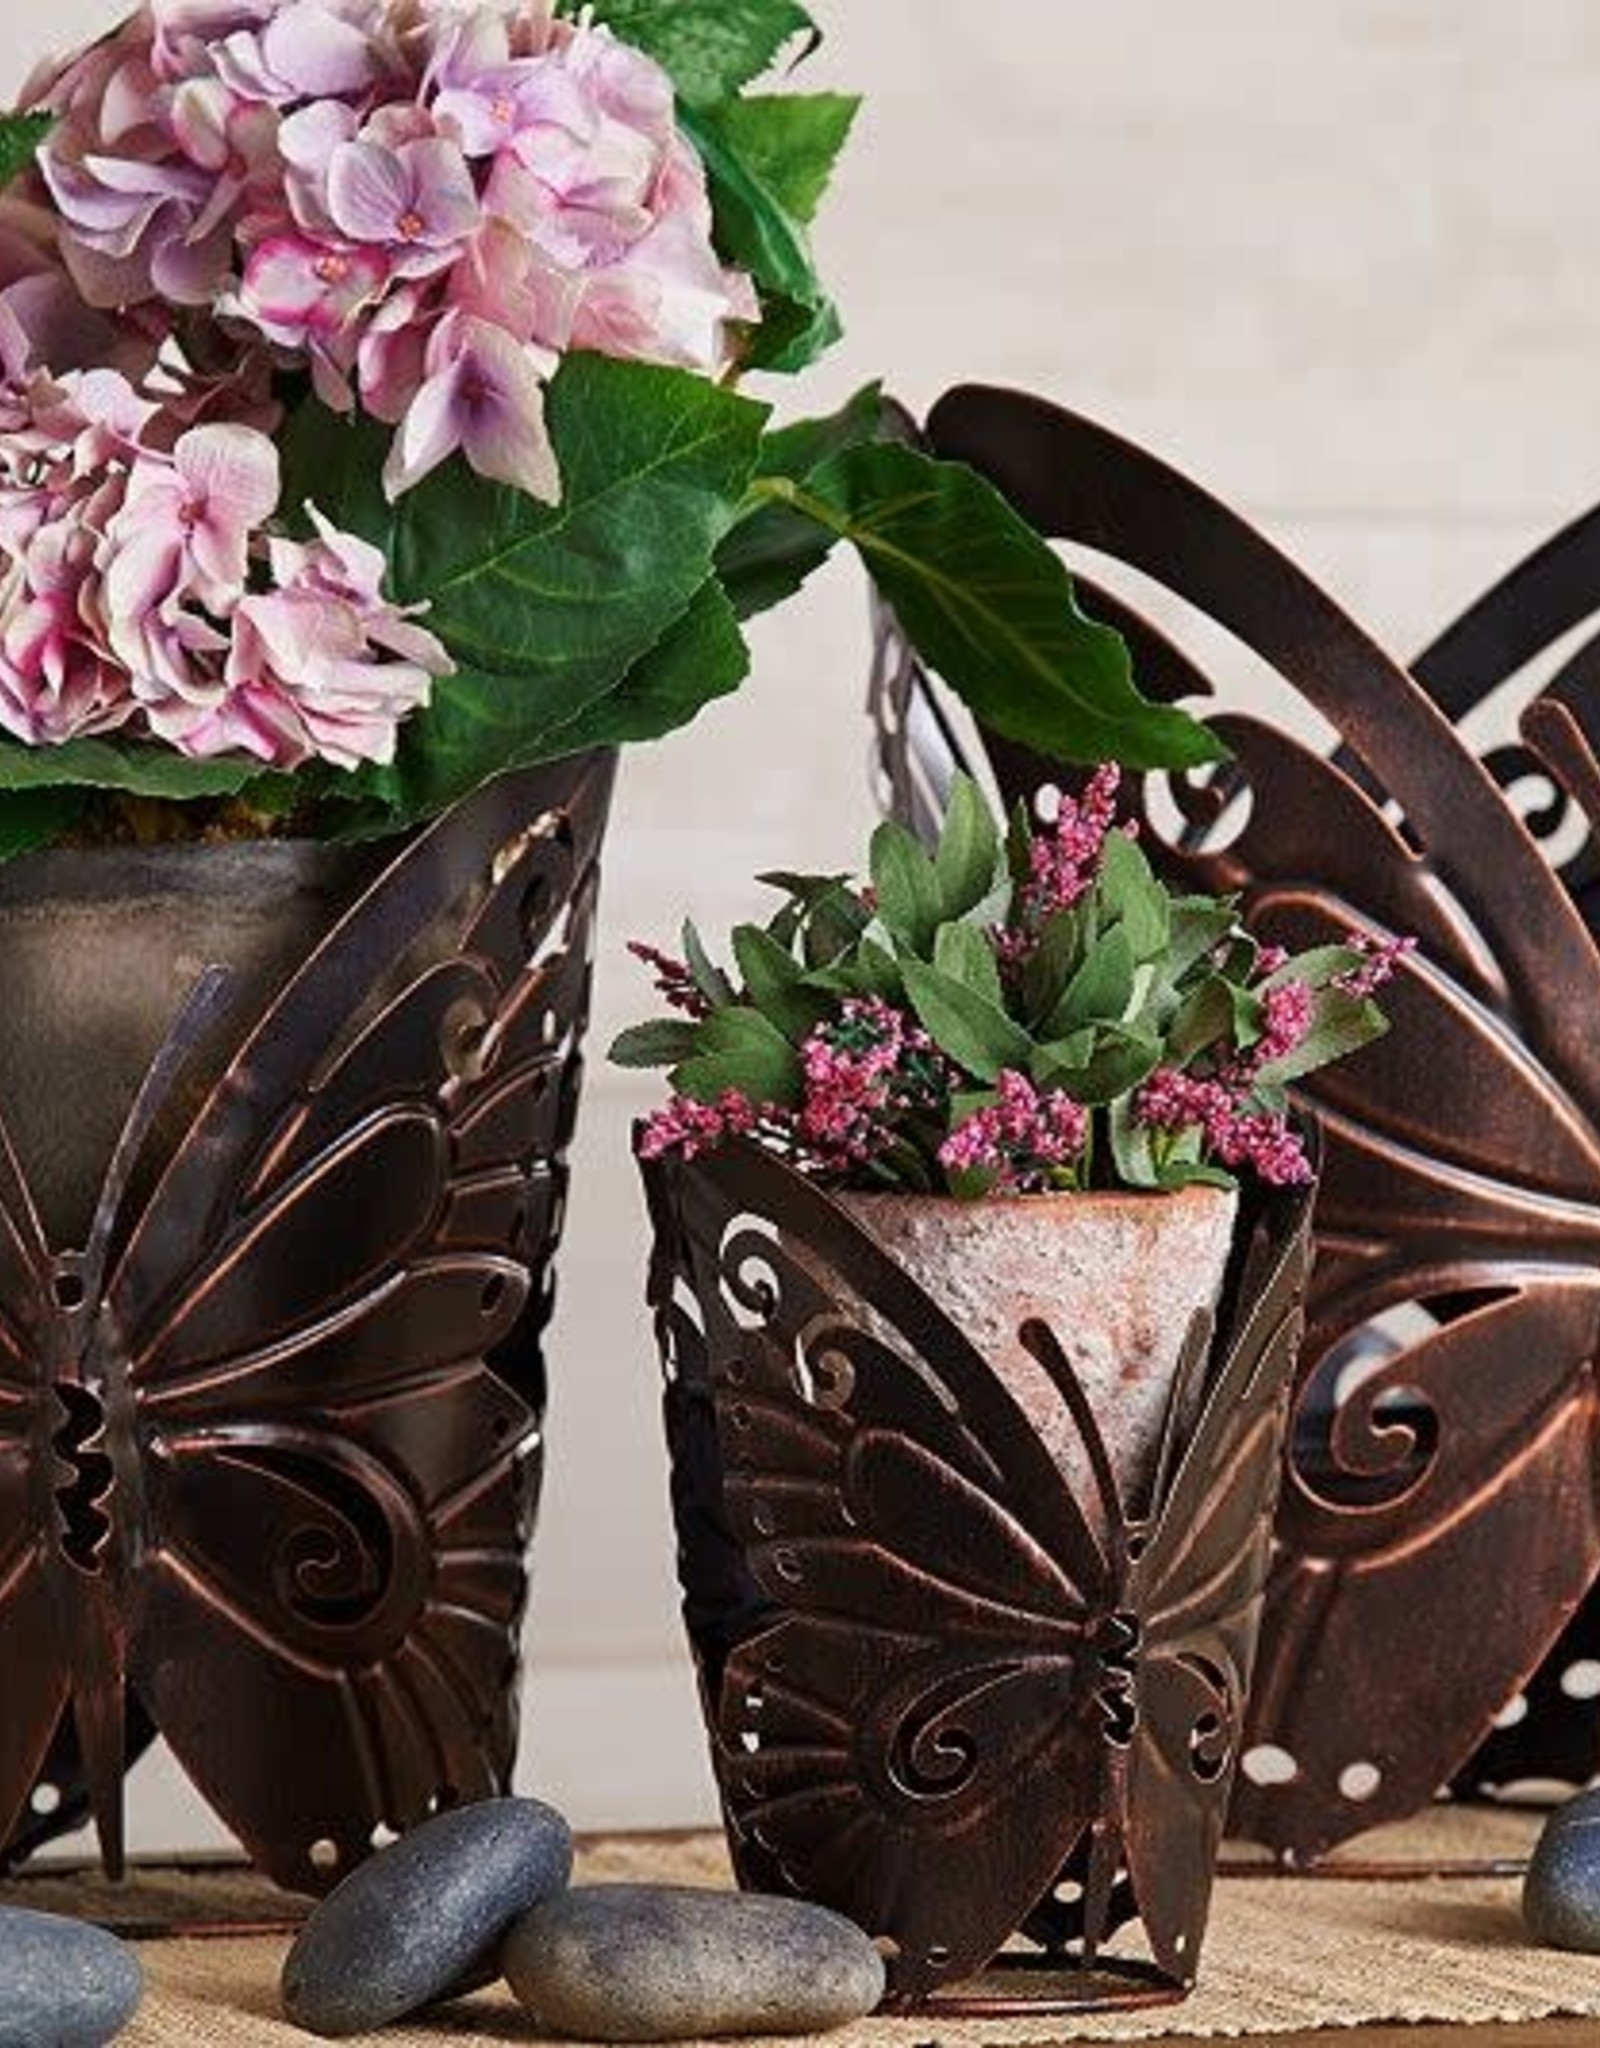 Set of 3 Metal Butterfly Holders by Valerie